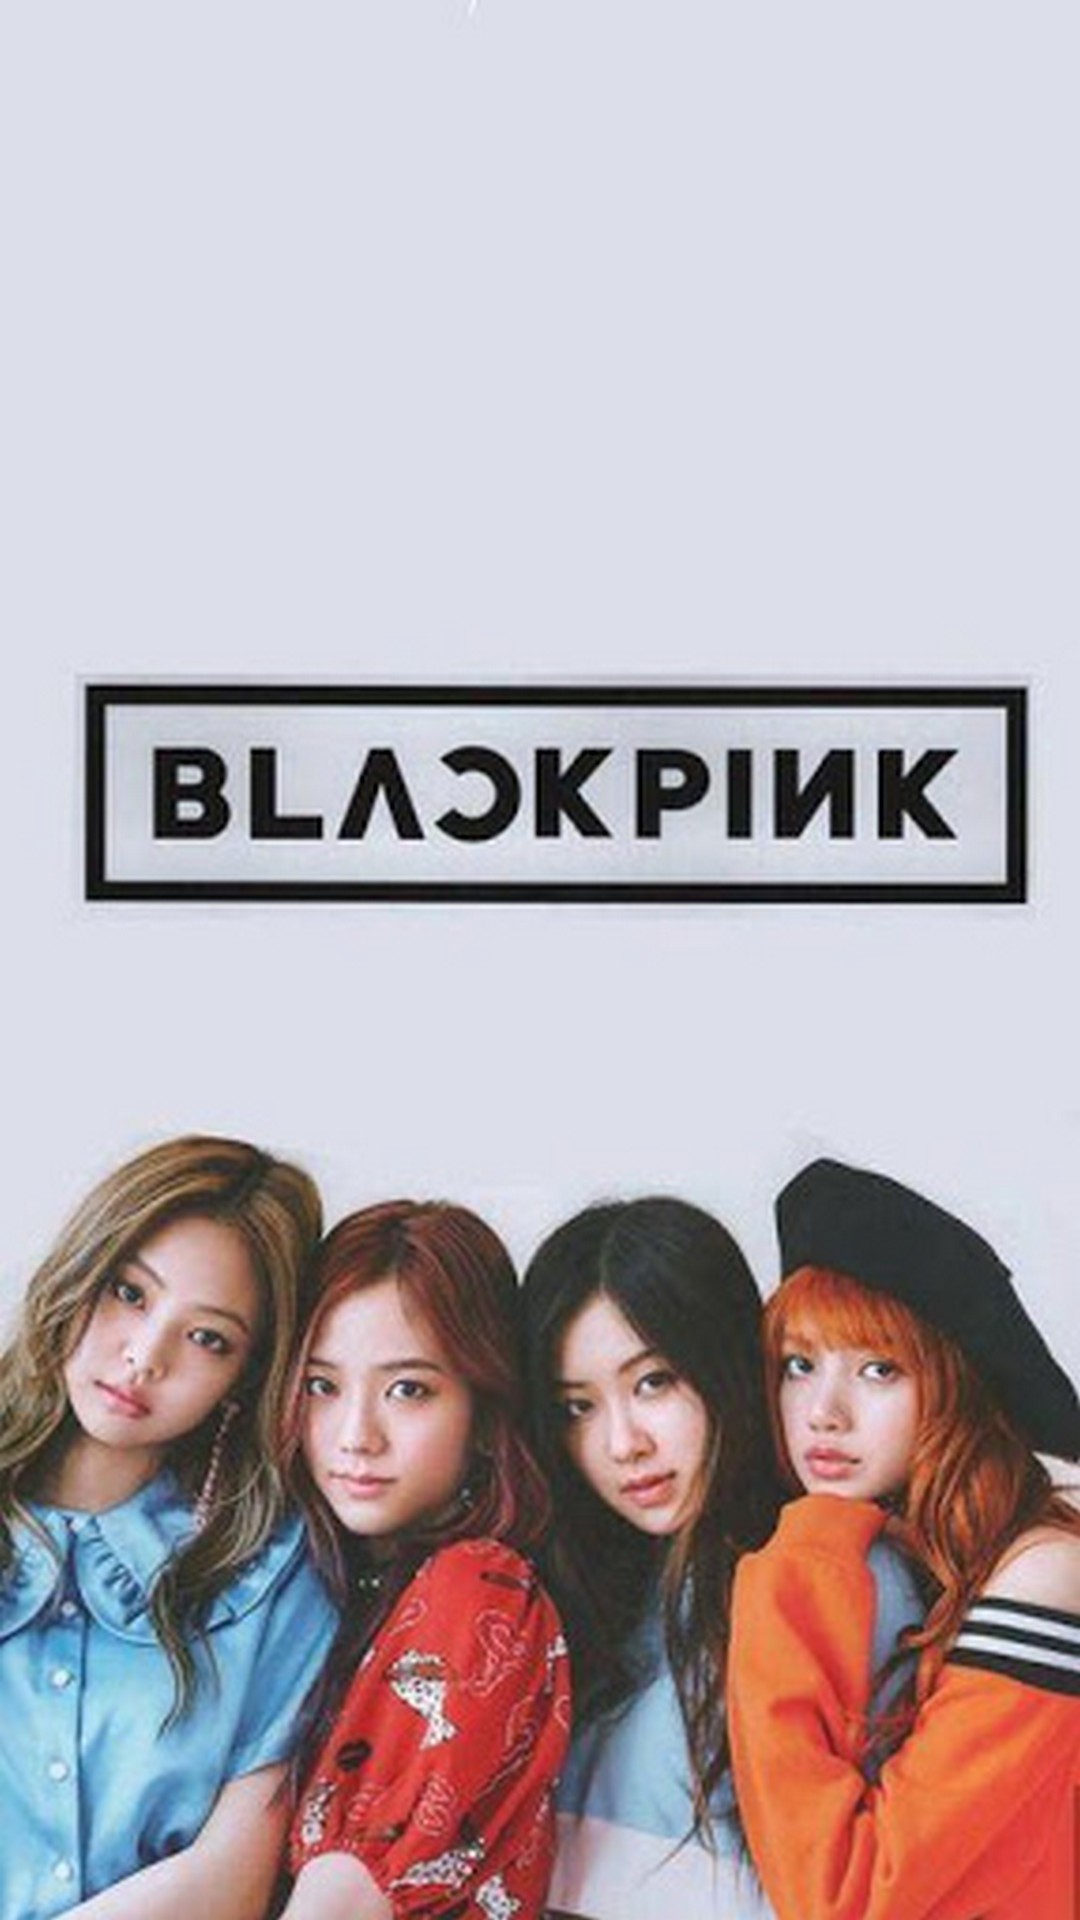 Wallpaper Android Blackpink With high-resolution 1080X1920 pixel. You can use this wallpaper for your Android backgrounds, Tablet, Samsung Screensavers, Mobile Phone Lock Screen and another Smartphones device